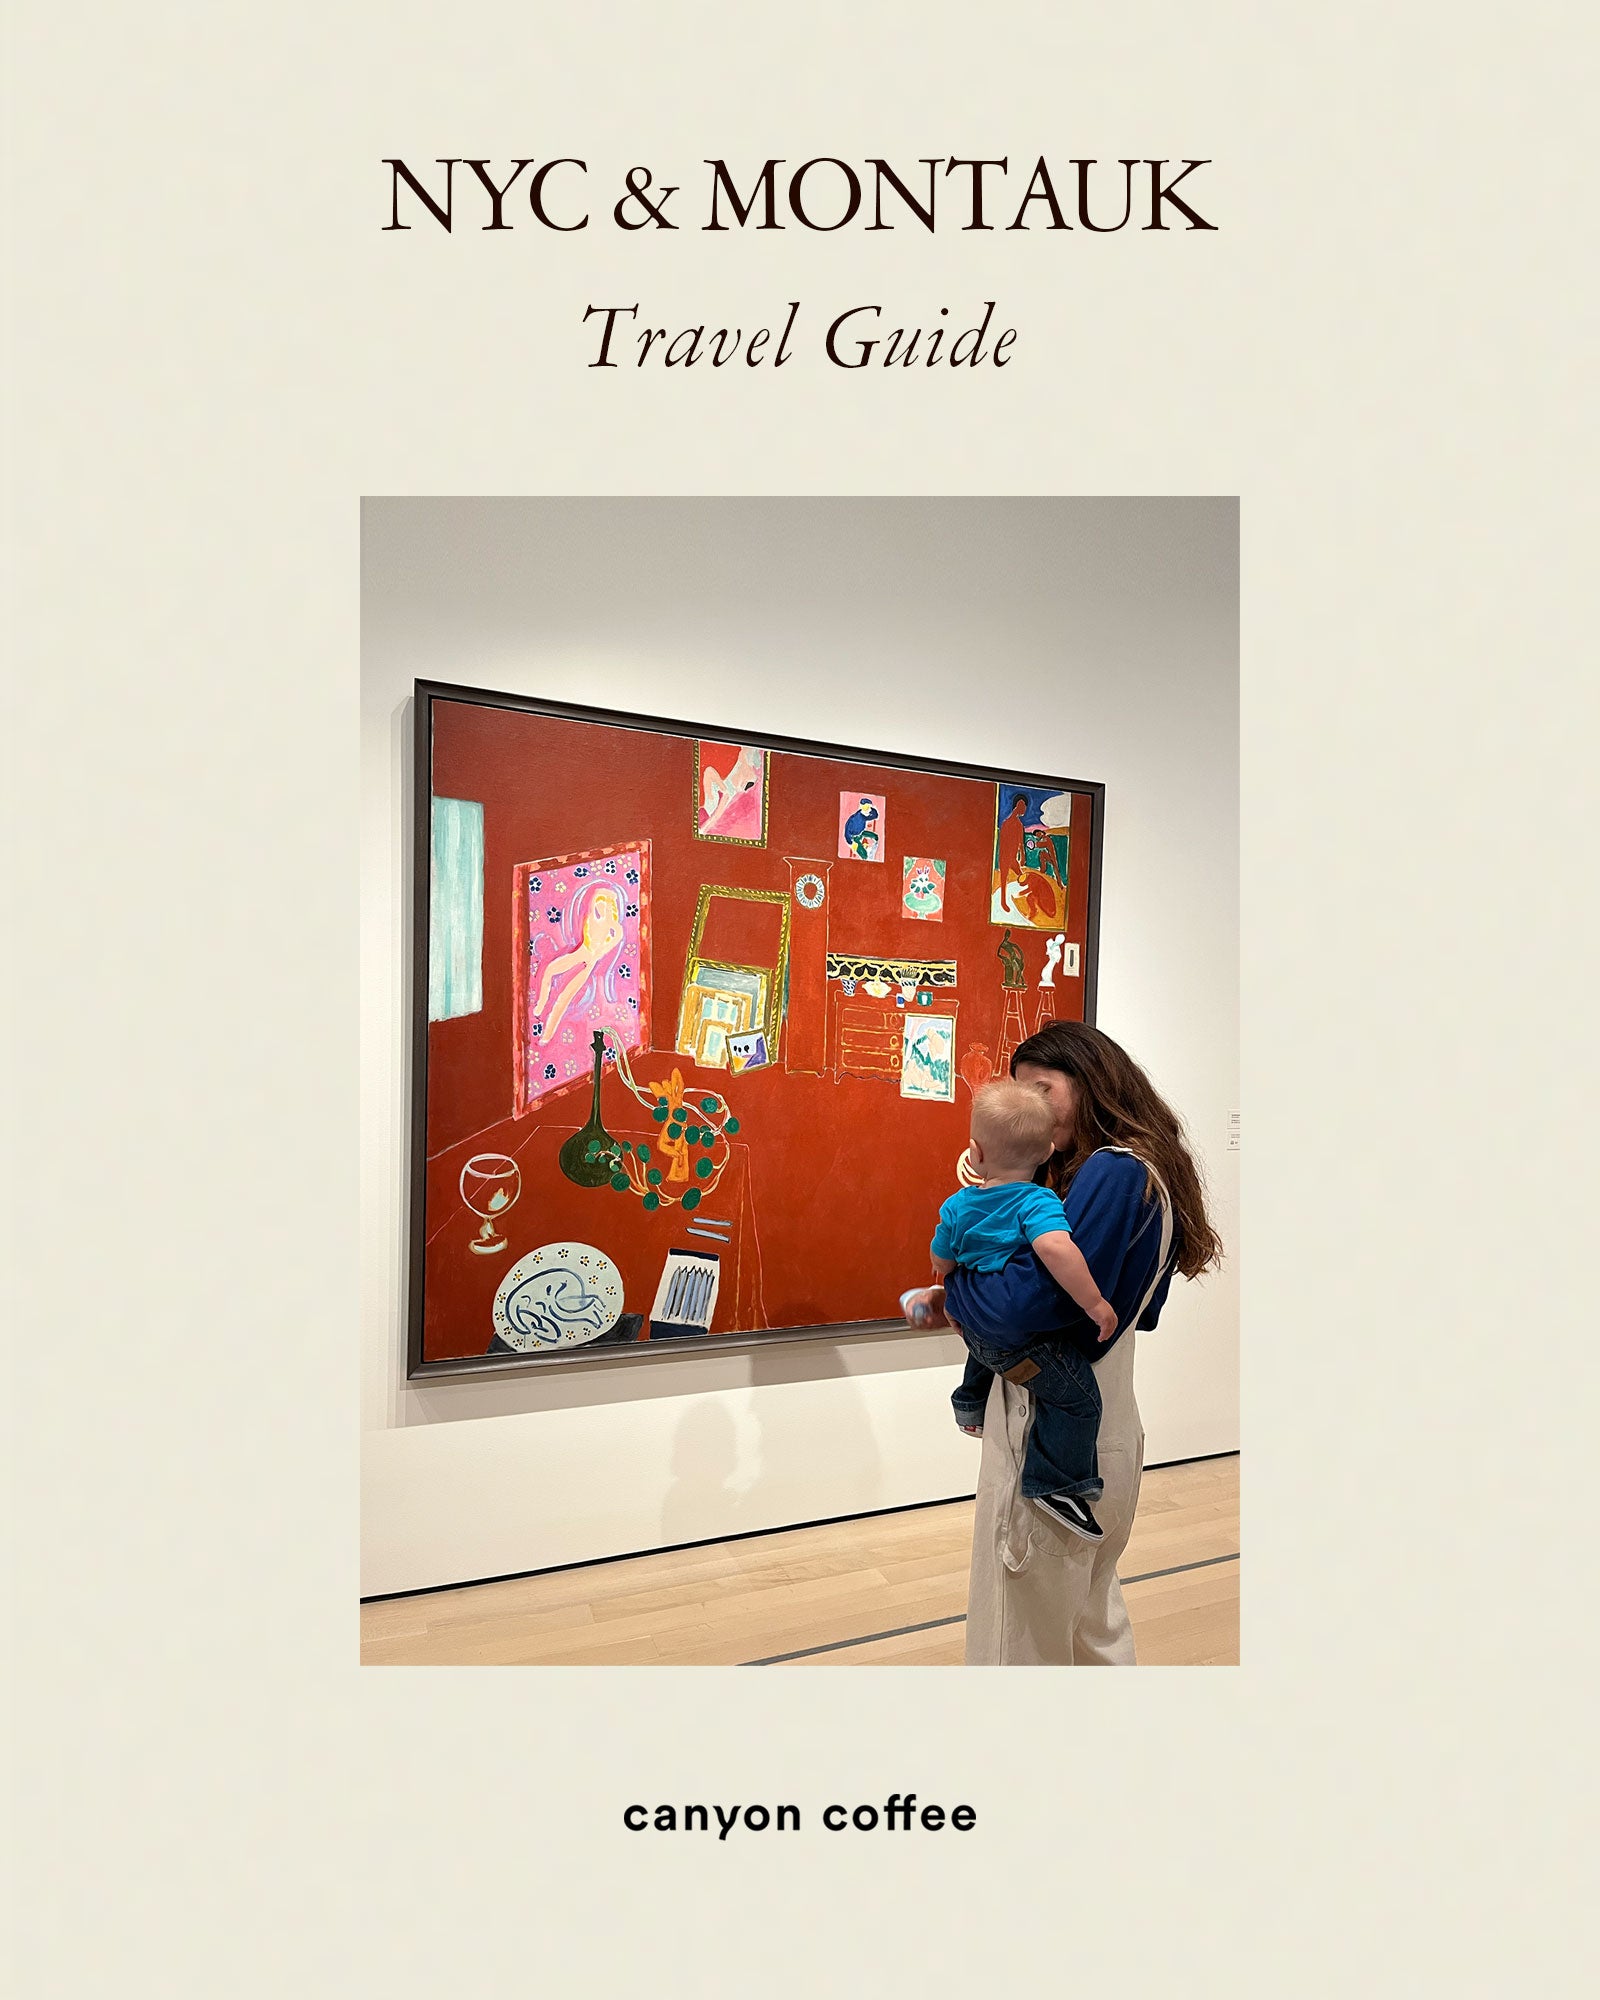 New York City Travel Guide by Canyon Coffee with an image of Ally Walsh and baby at the Moma